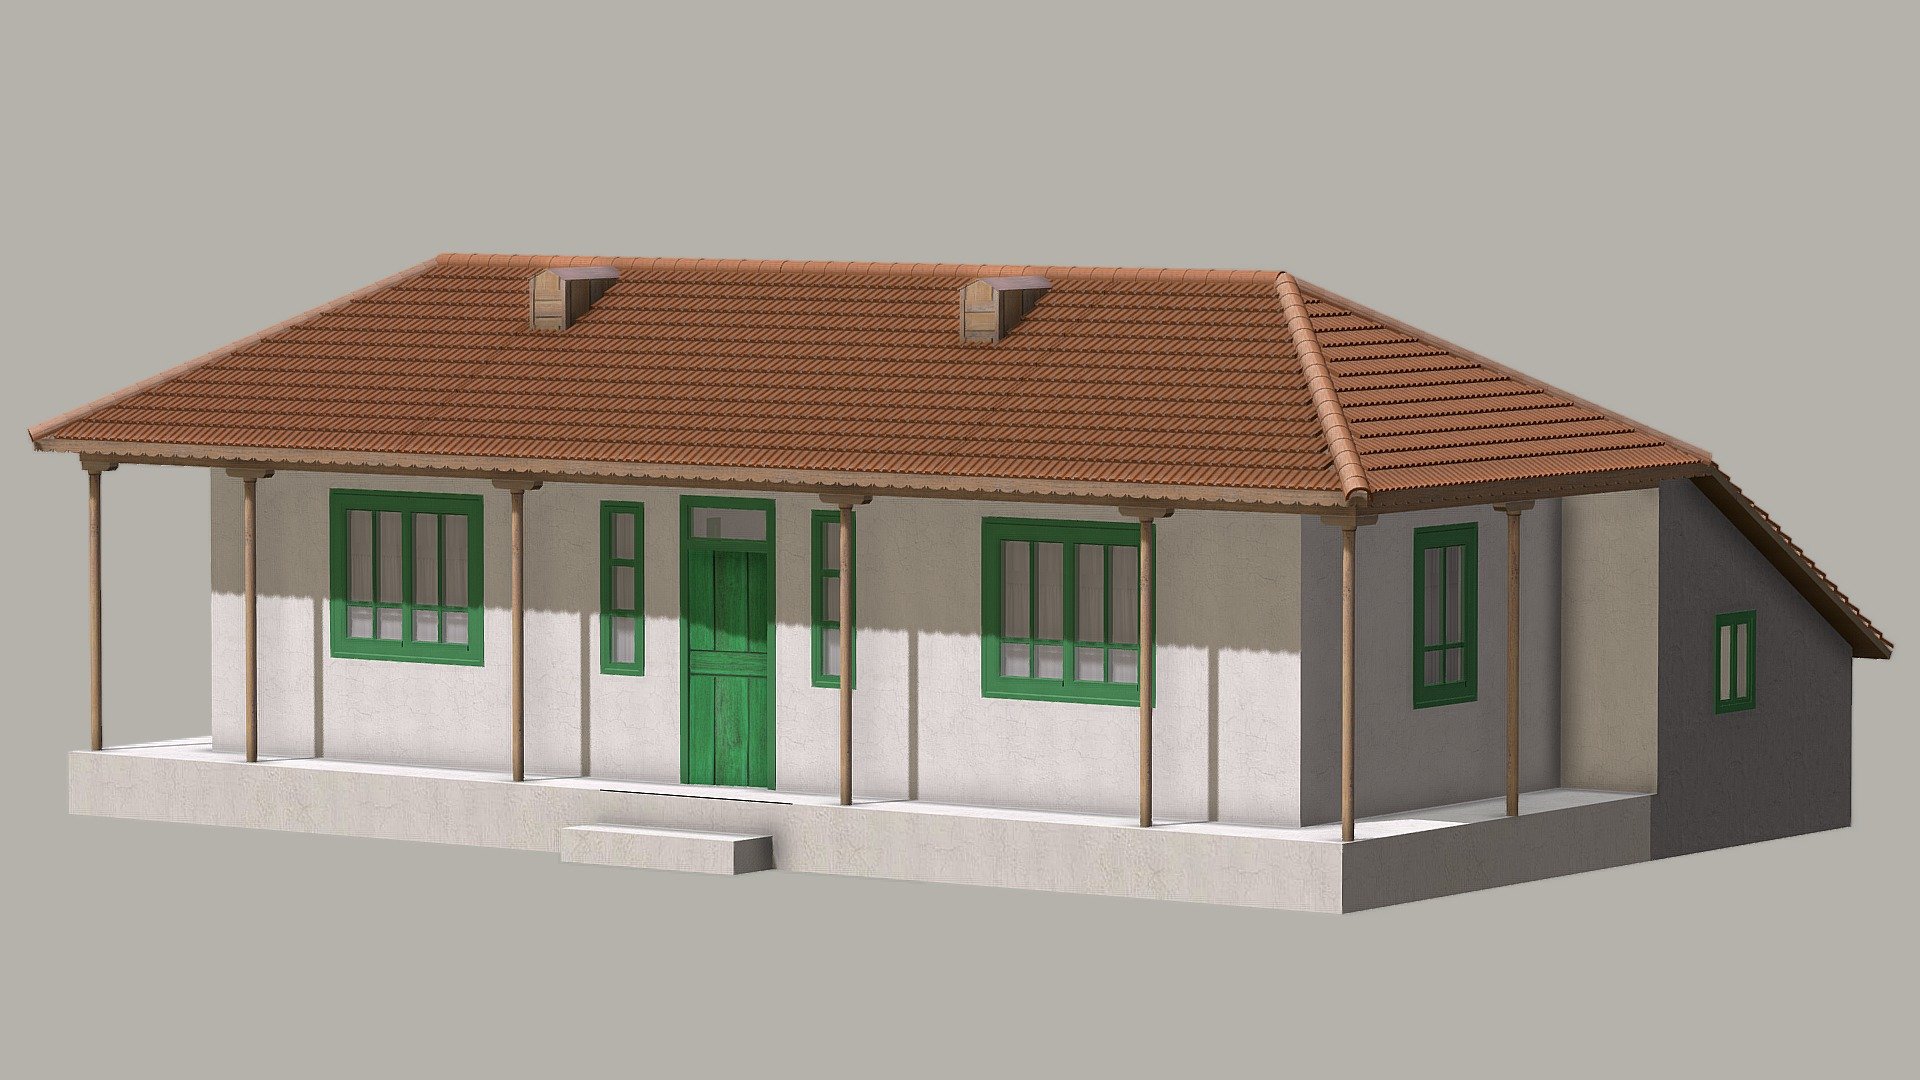 Balkan house from Vâlcelele (Valalî), Constanța County (Romania), dating back to the 1930s 3d model